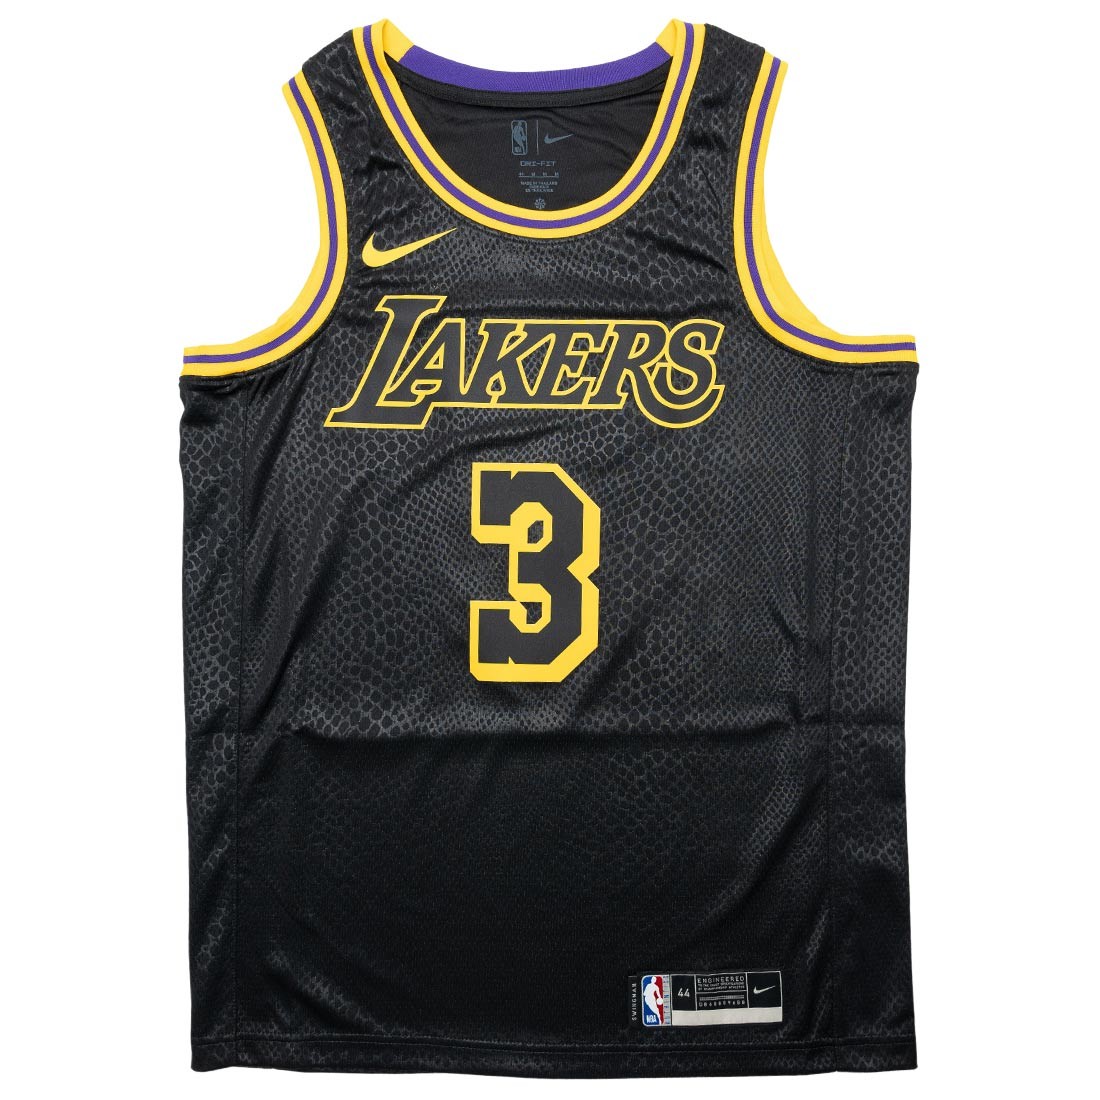 anthony lakers jersey